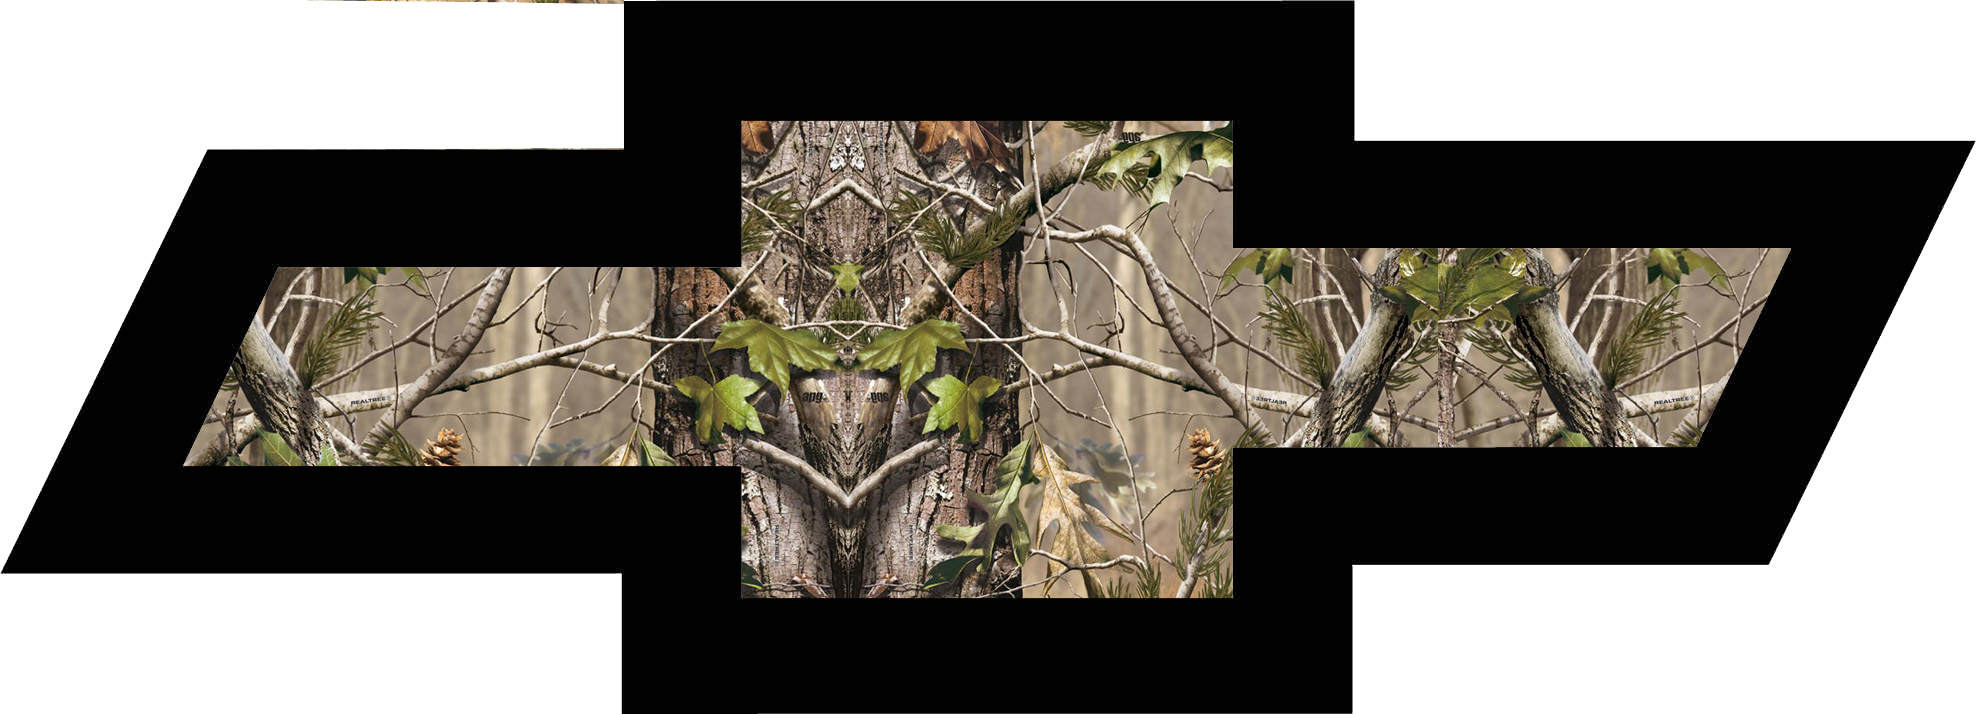 Camo Chevy Symbol Wallpaper Image Pictures Becuo